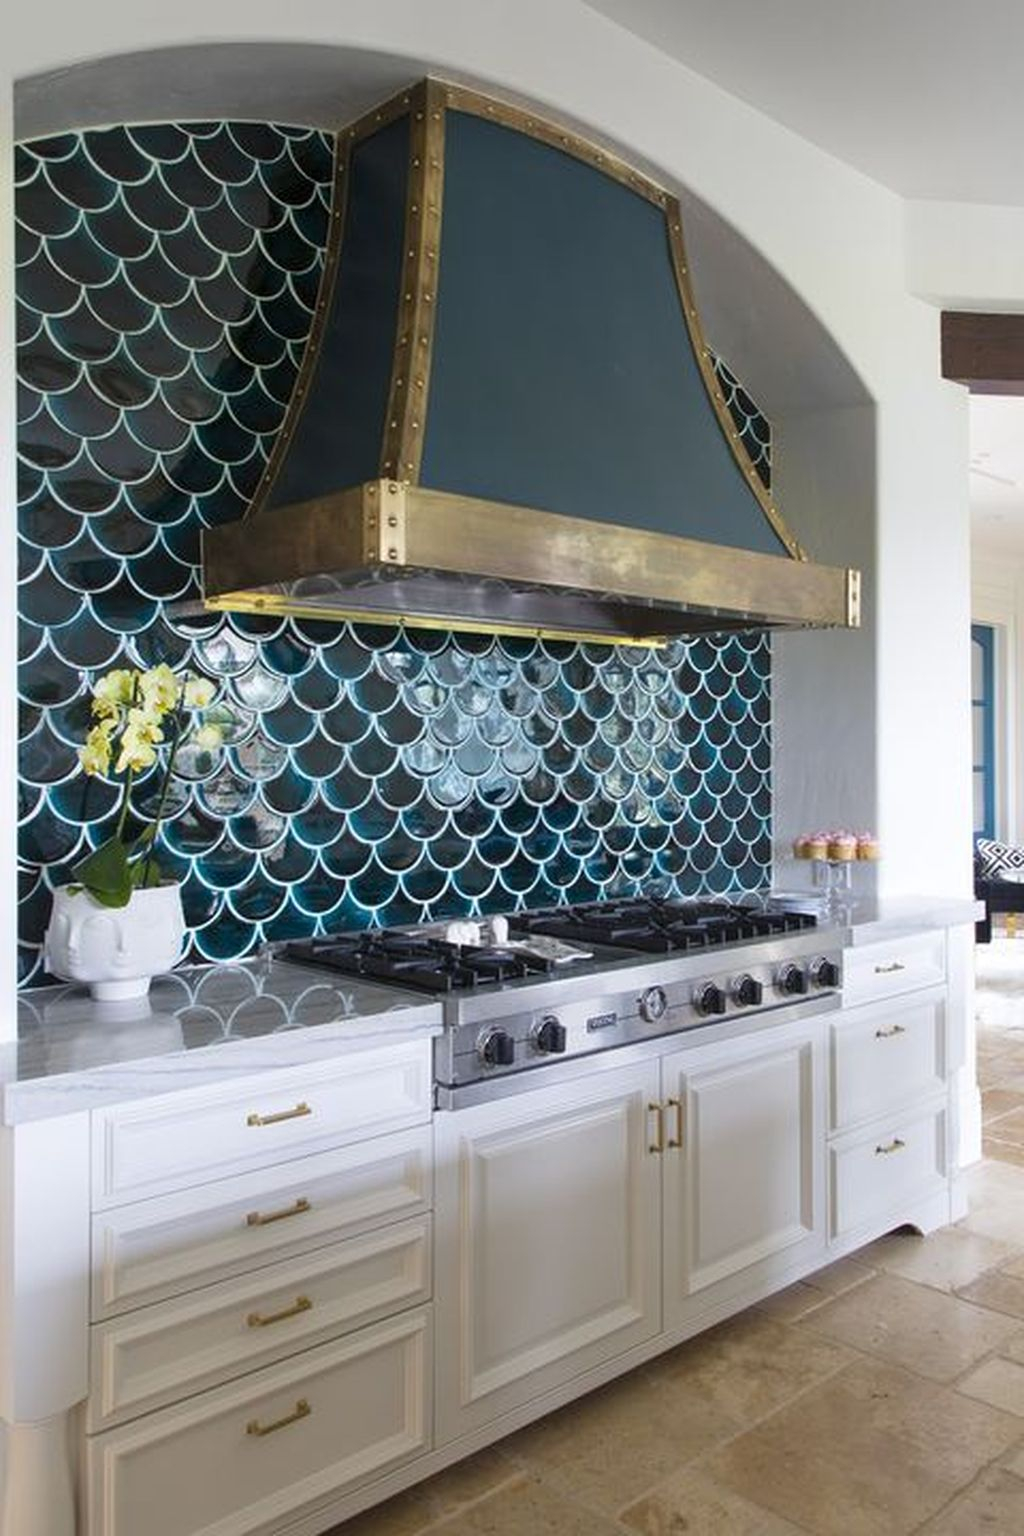 Kaleidoscopic Kitchens: A Splash Of Unexpected Colors